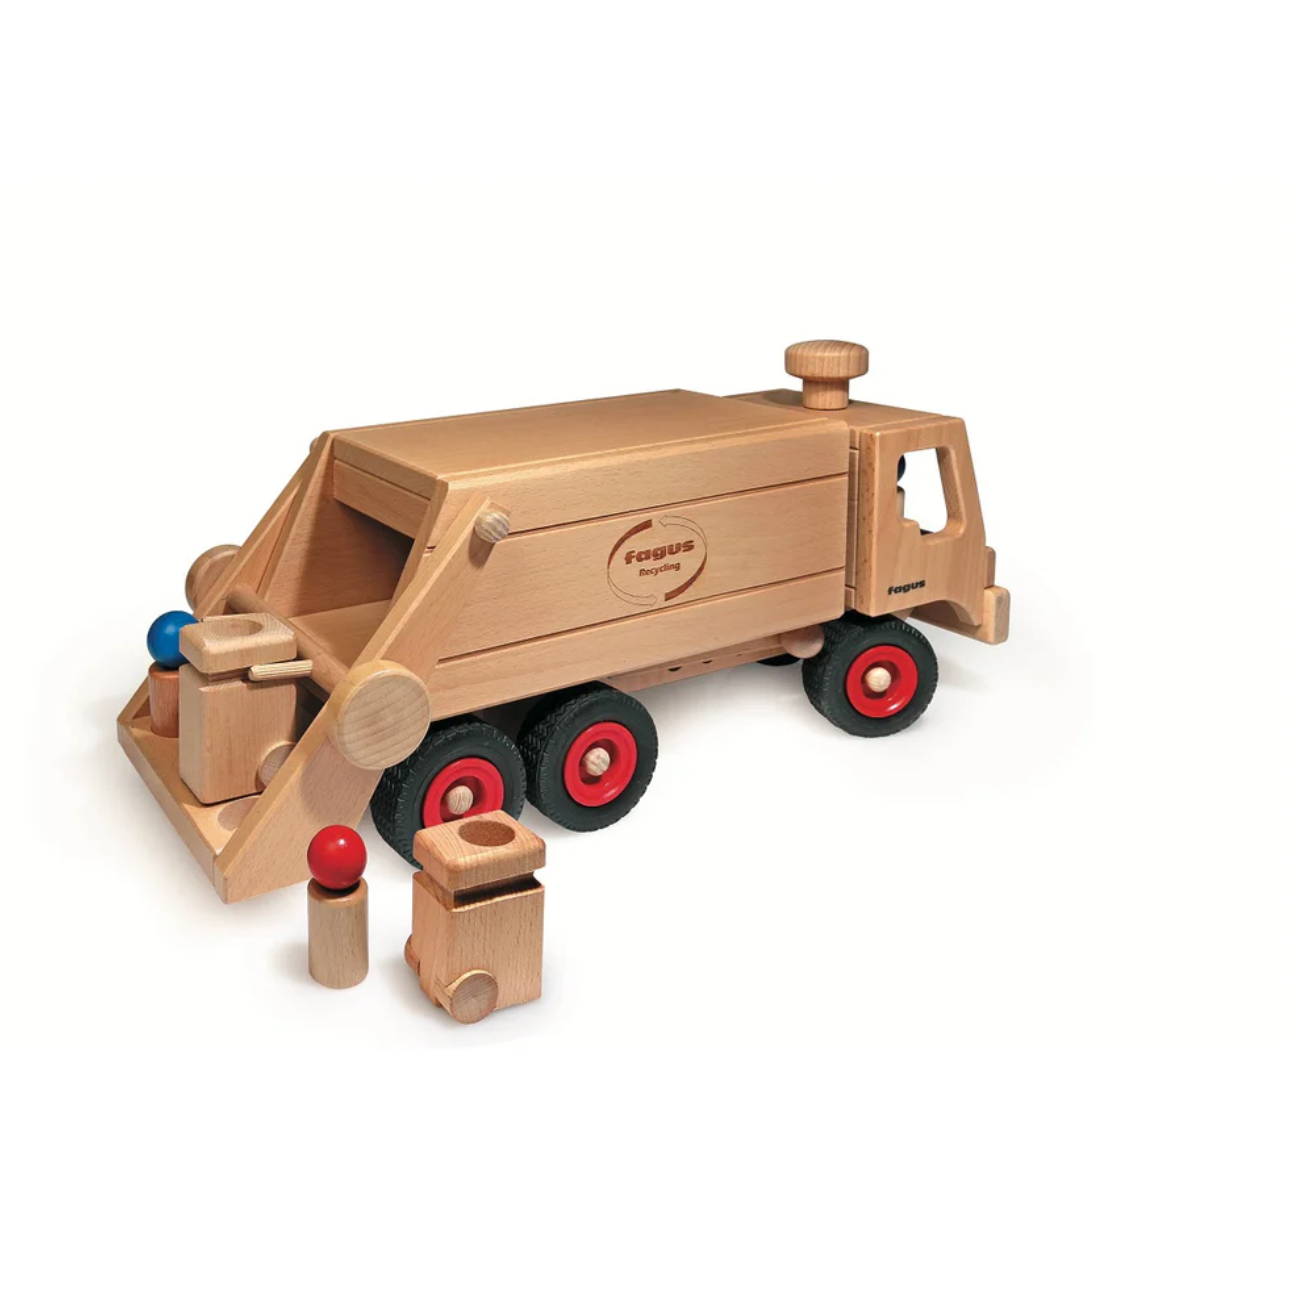 Fagus Recycling/Garbage Truck | Wooden Toy Vehicle